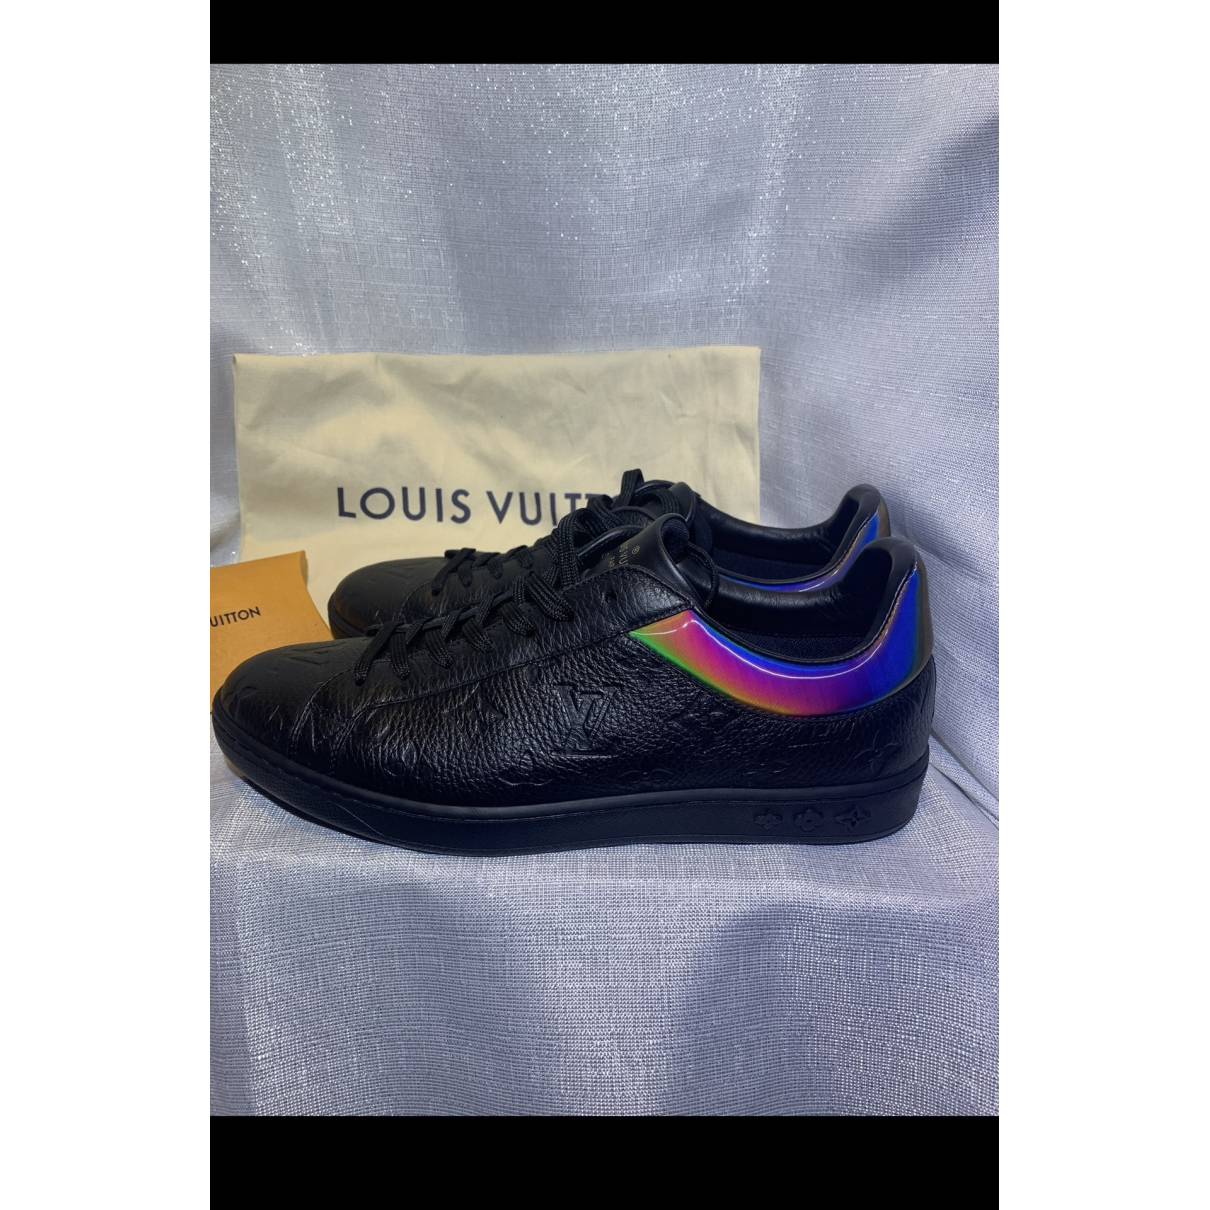 Louis Vuitton - Authenticated Luxembourg Trainer - Leather Black Plain for Men, Very Good Condition